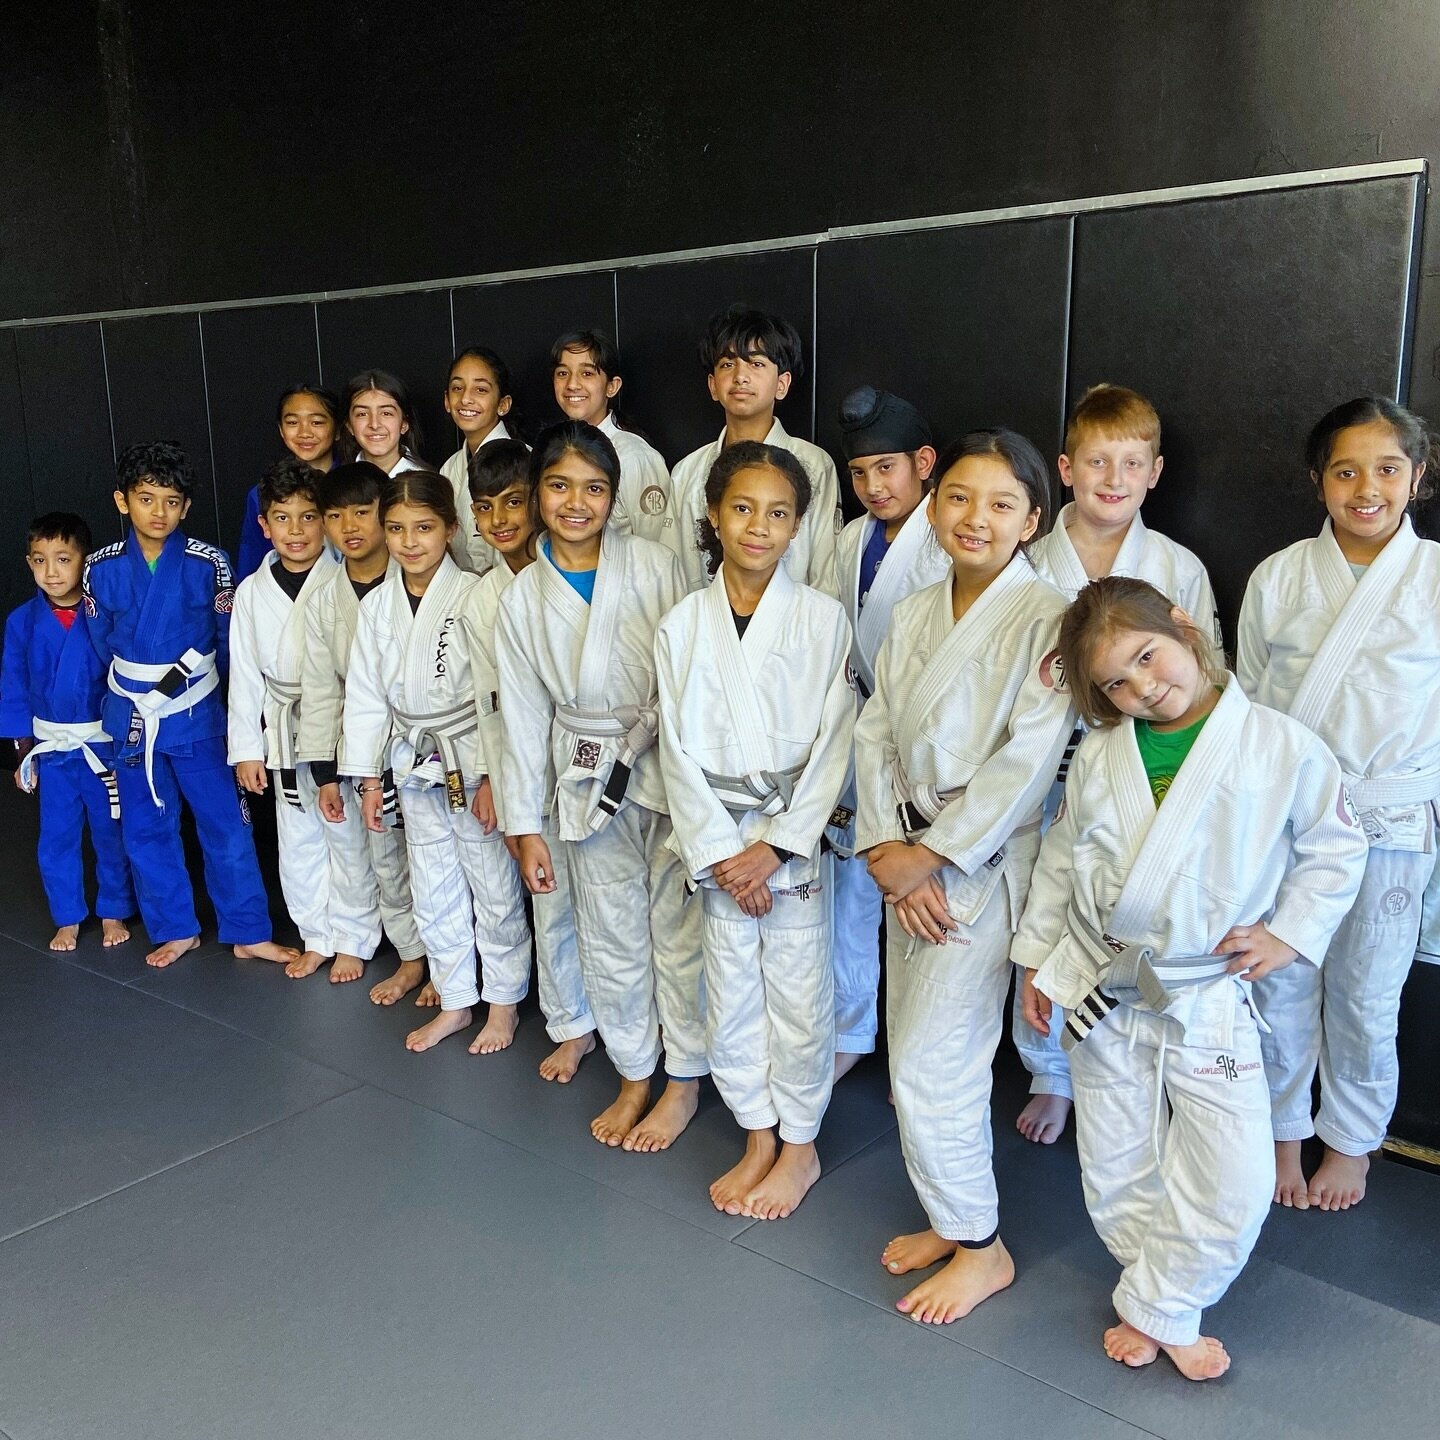 🥋Future champions in the making!

⚔️ These young warriors just wrapped up a challenging competition class. Hard work, resilience, and smiles all around!

Preparing for @lutandoseries in March 🦾👊🏽

 #BJJKids #FutureChamps #JiuJitsuJourney&rdquo;